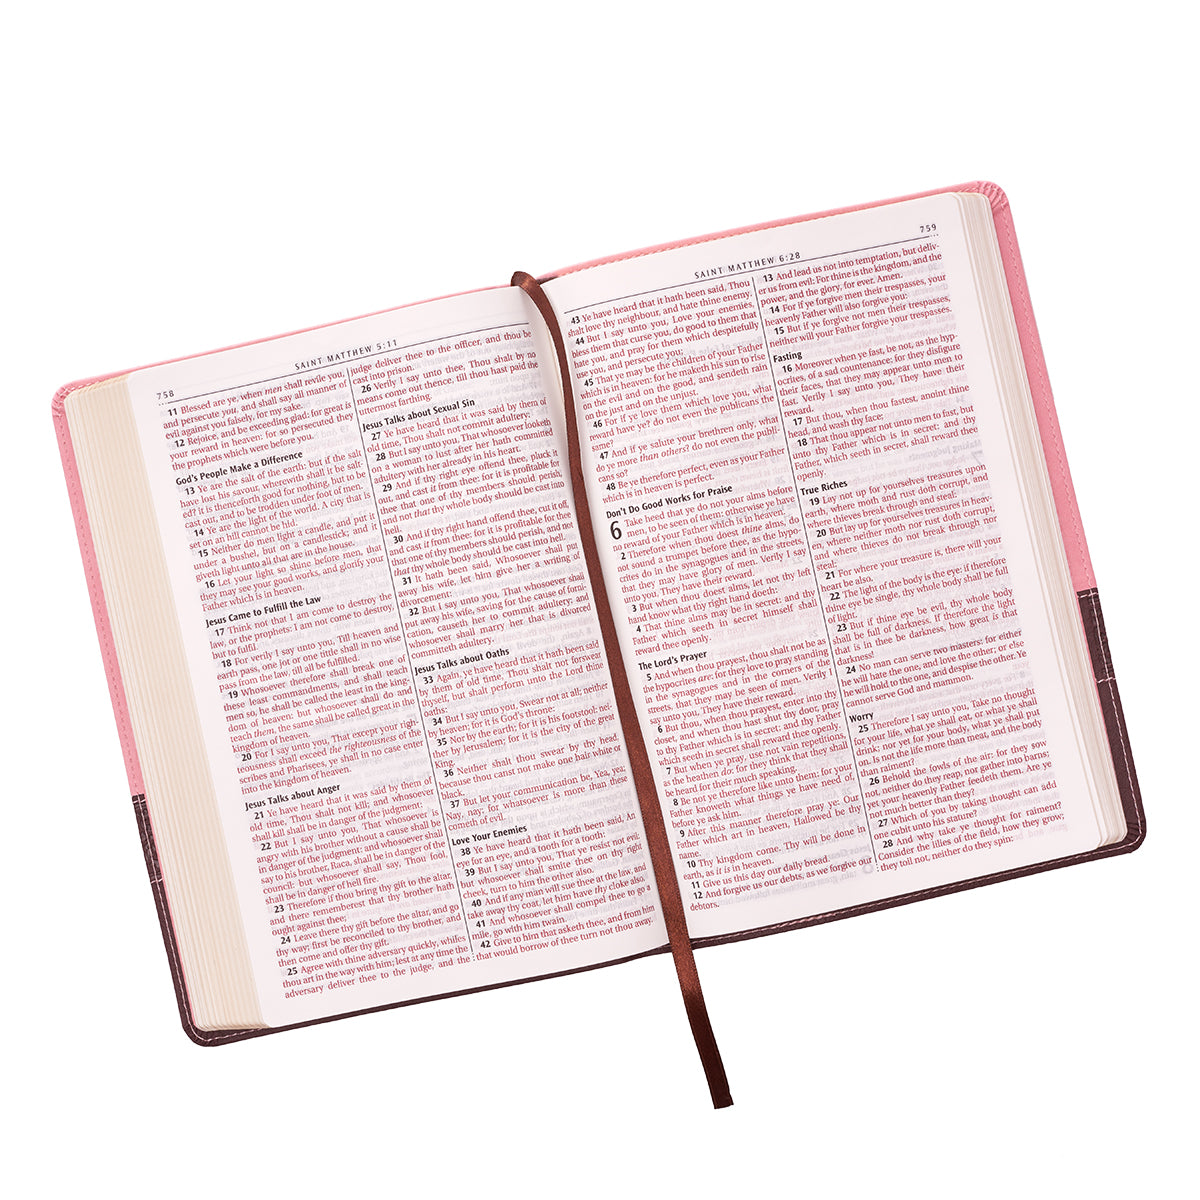 Image of KJV Large Print Bible, Brown and Pink, Imitation Leather, Red Letter, Verse Finder, Reading Plan, Gilt Edged, Ribbon Marker, Presentation Page, Subheadings other